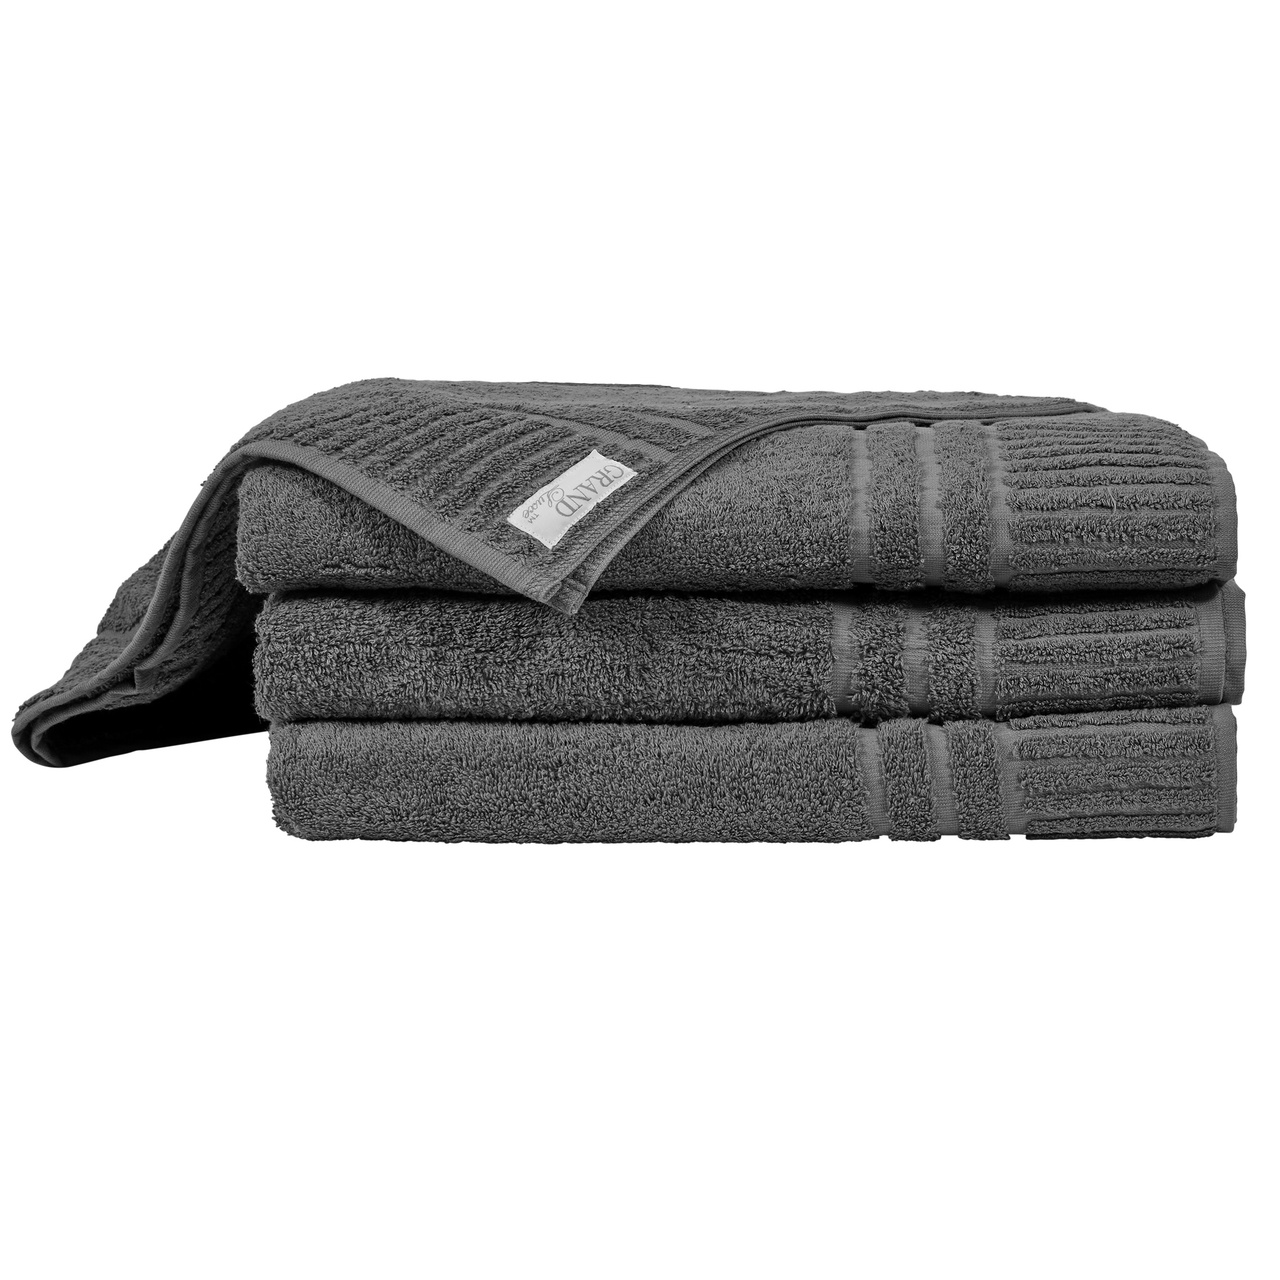 Towel Grand Luxe Cashmere Gray 100x150 cm 500 g